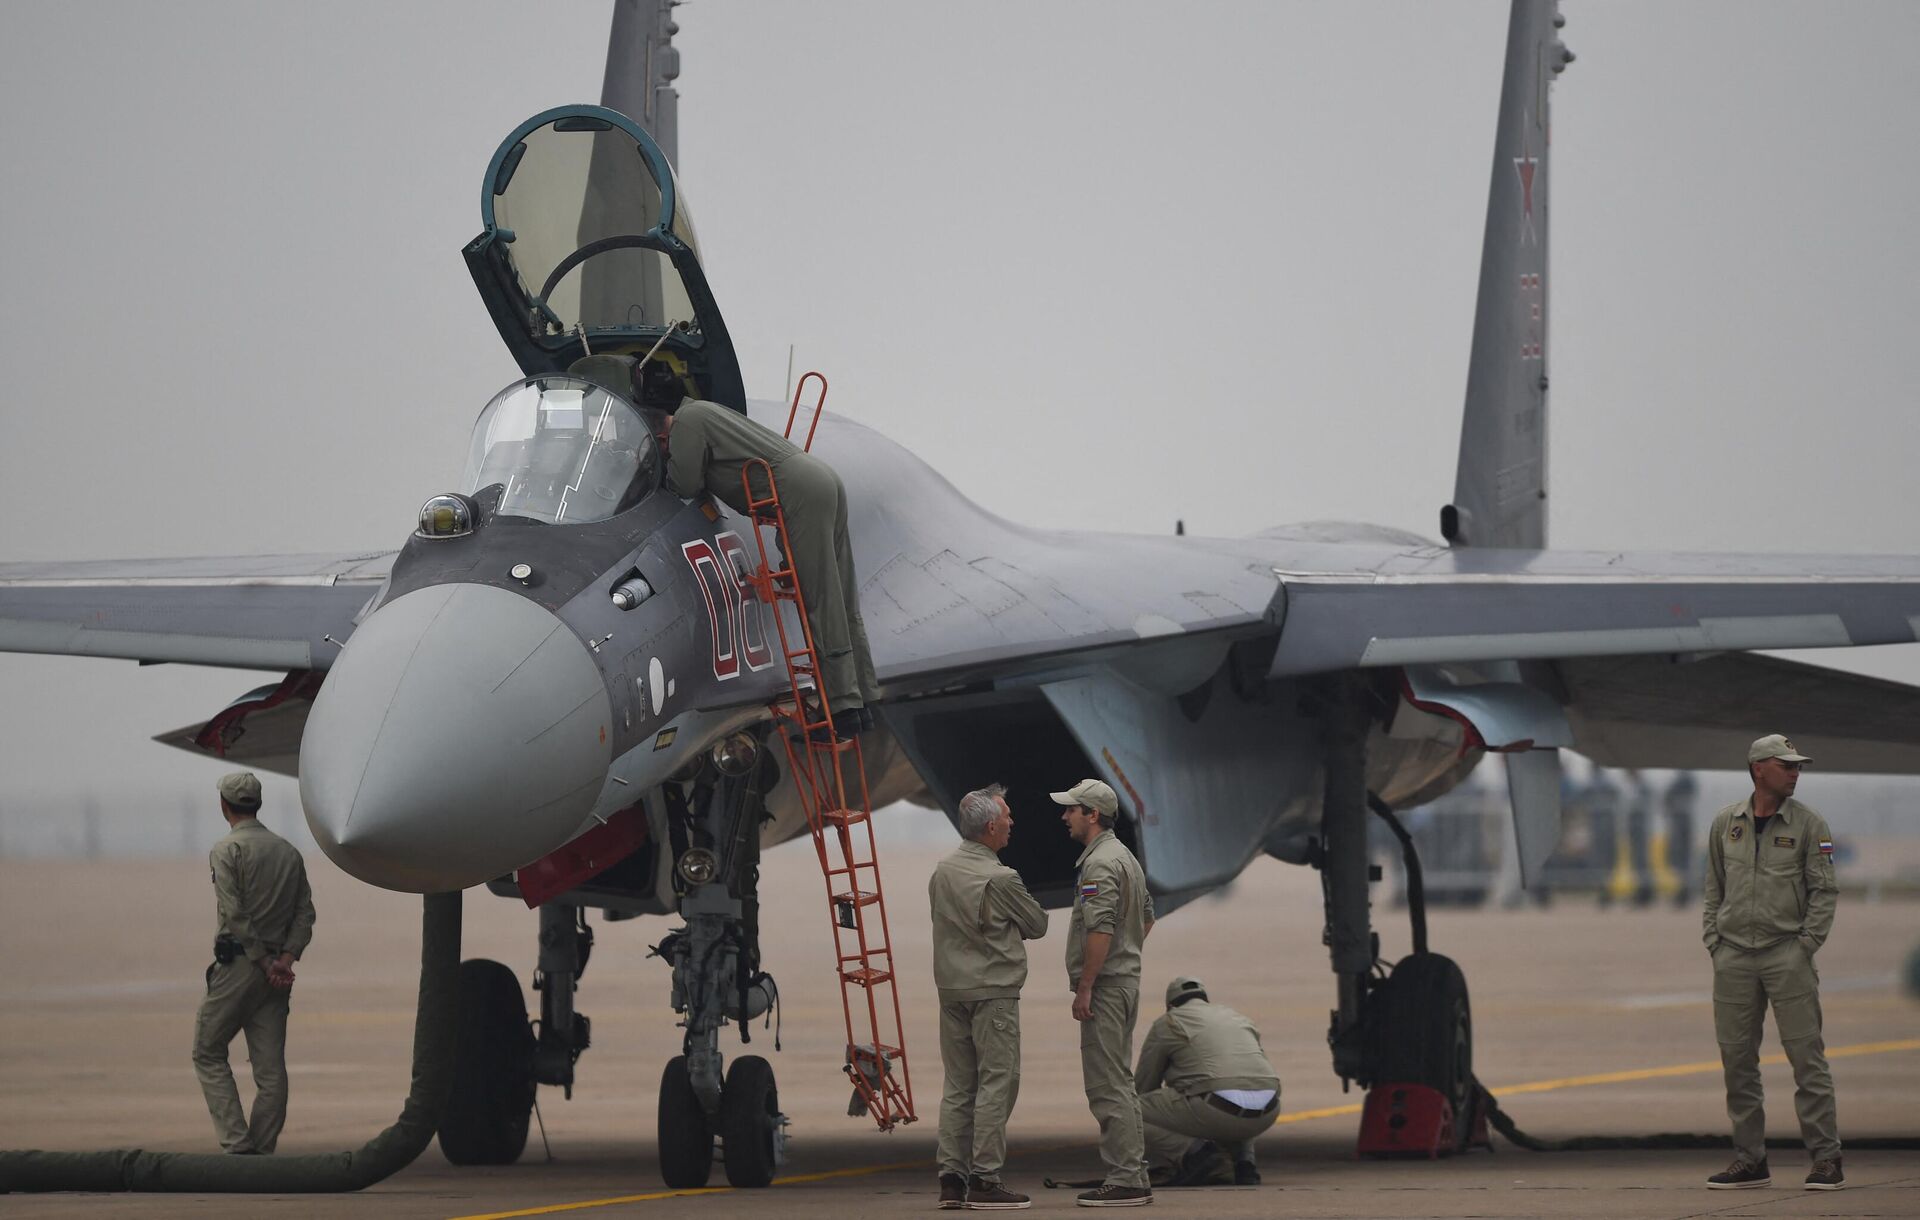 A Sukhoi SU-35 fighter jet is displayed before a test flight ahead of the Airshow China 2014 in Zhuhai, South China's Guangdong province on November 10, 2014 - Sputnik International, 1920, 27.01.2023